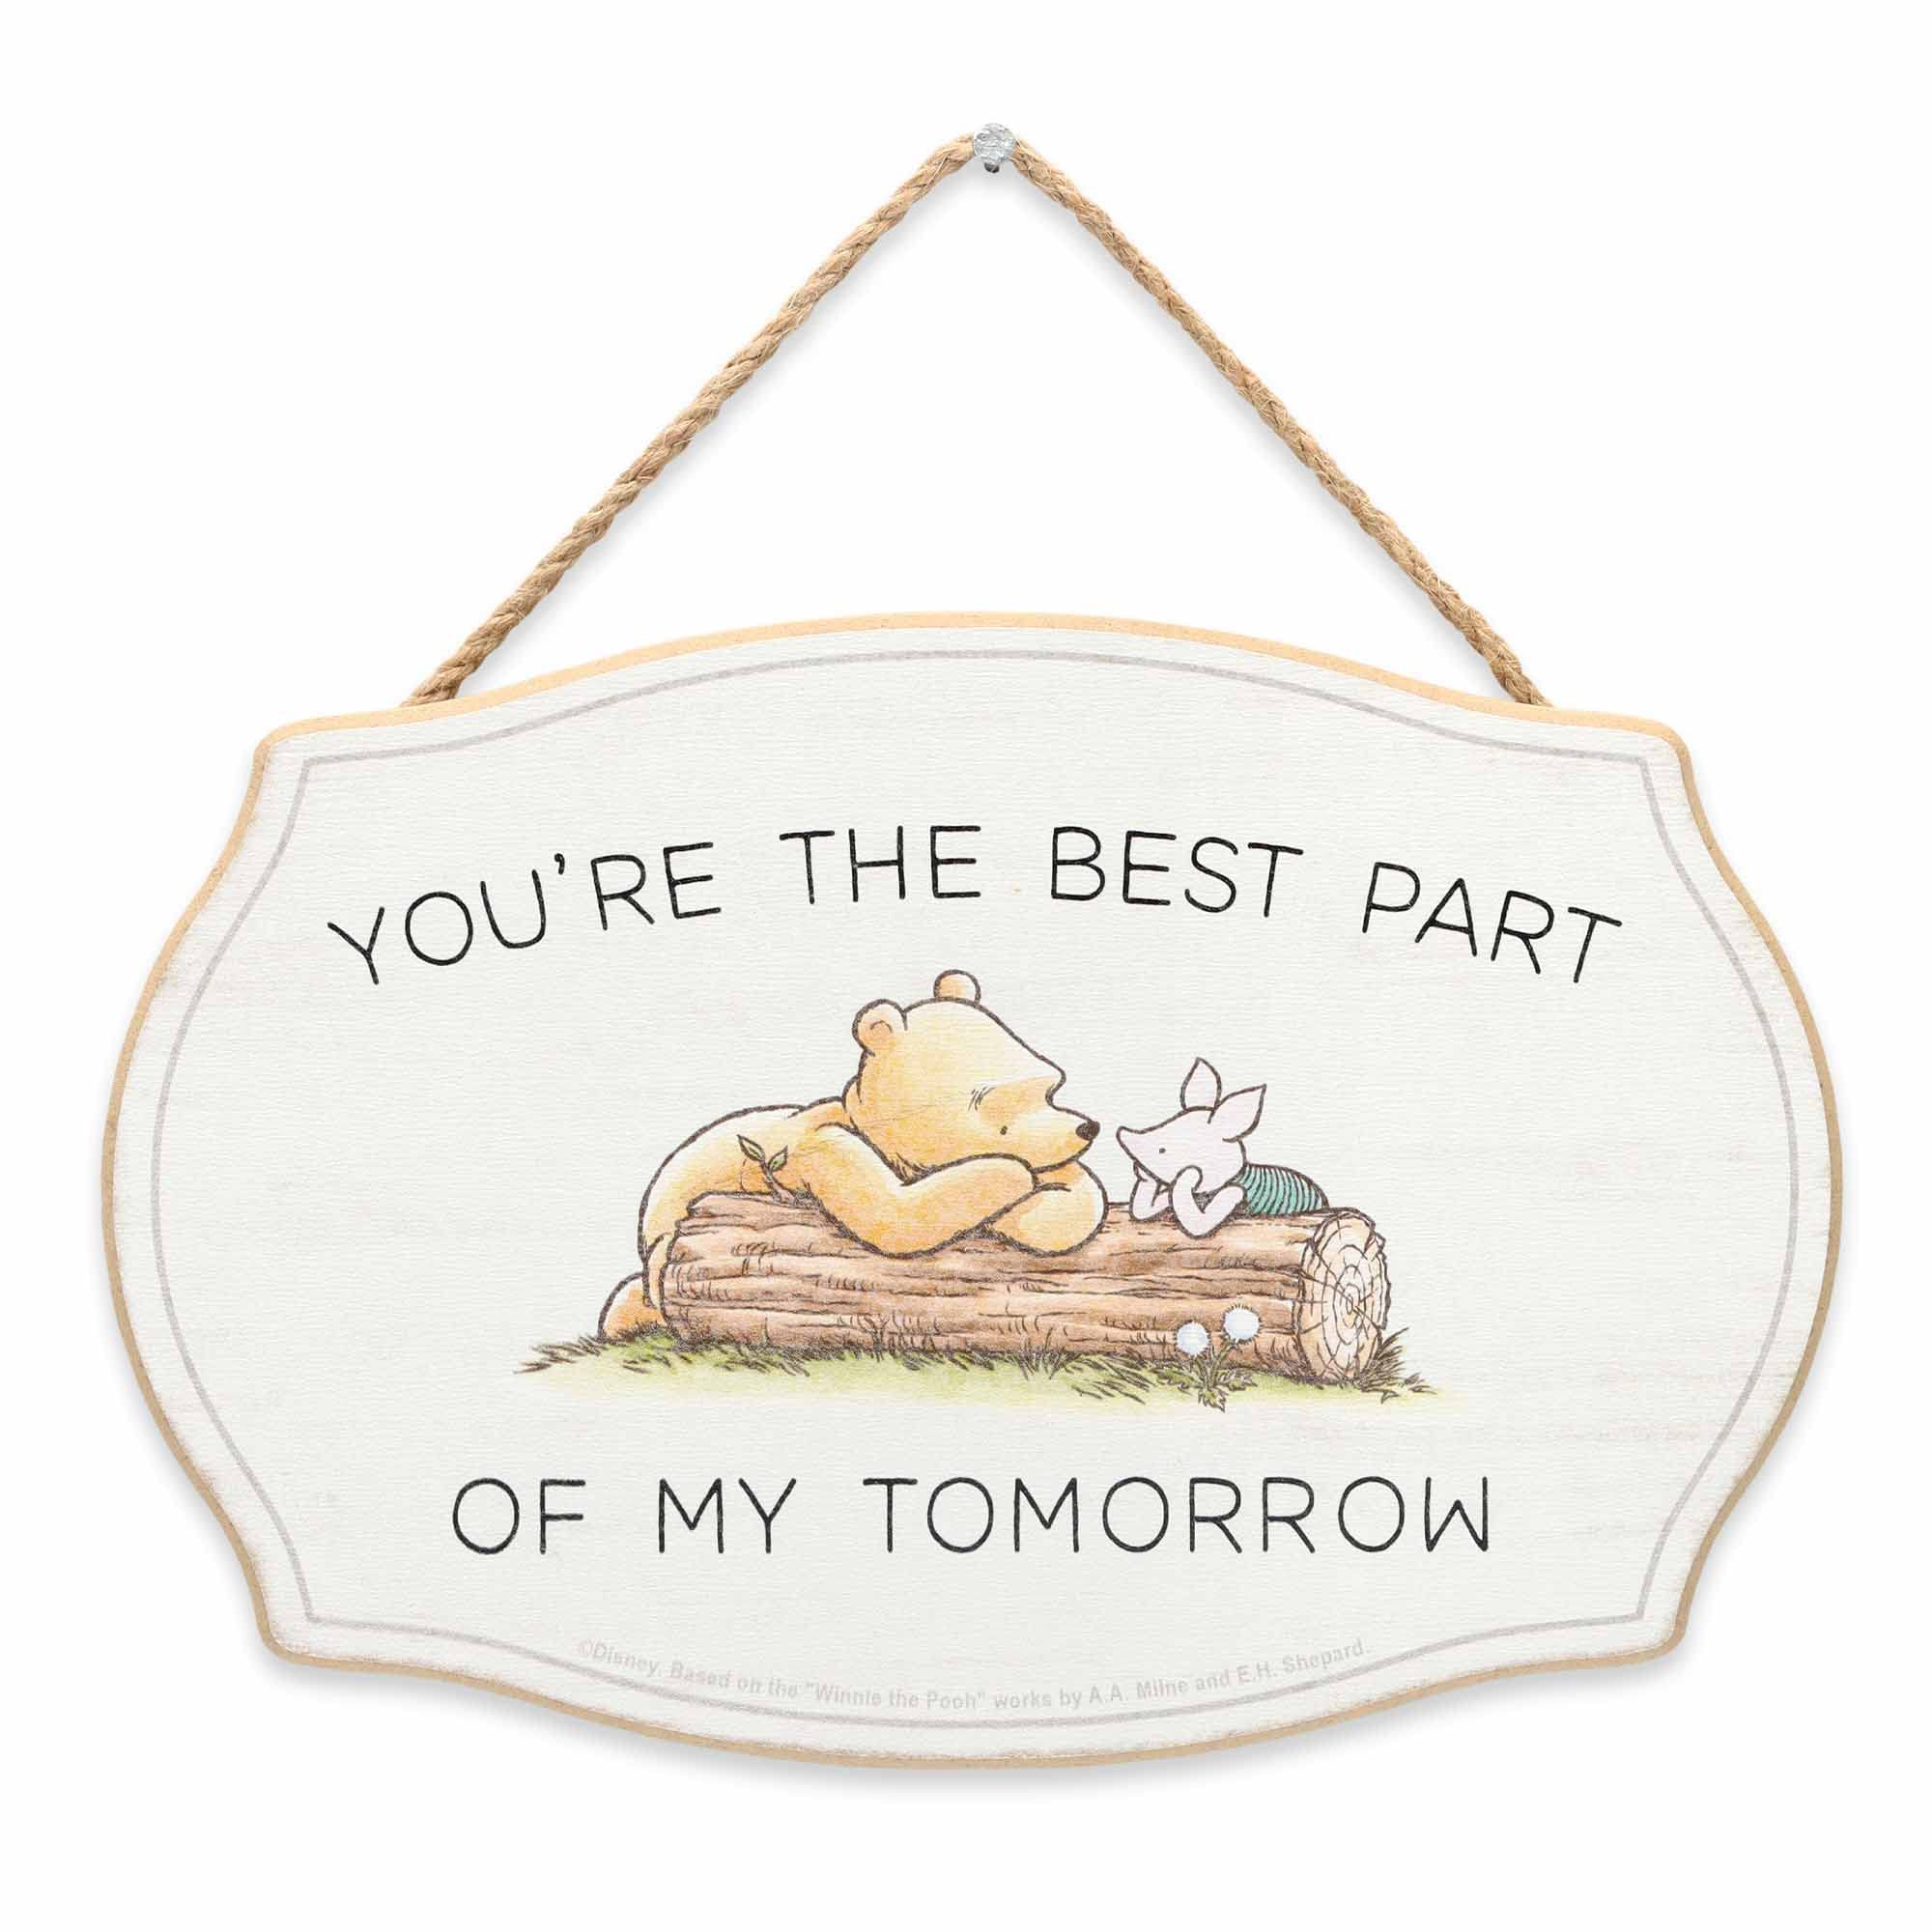 Open Road Brands Disney Winnie the Pooh You're the Best Part Hanging Wood Wall Decor - Adorable Winnie the Pooh Sign for Home